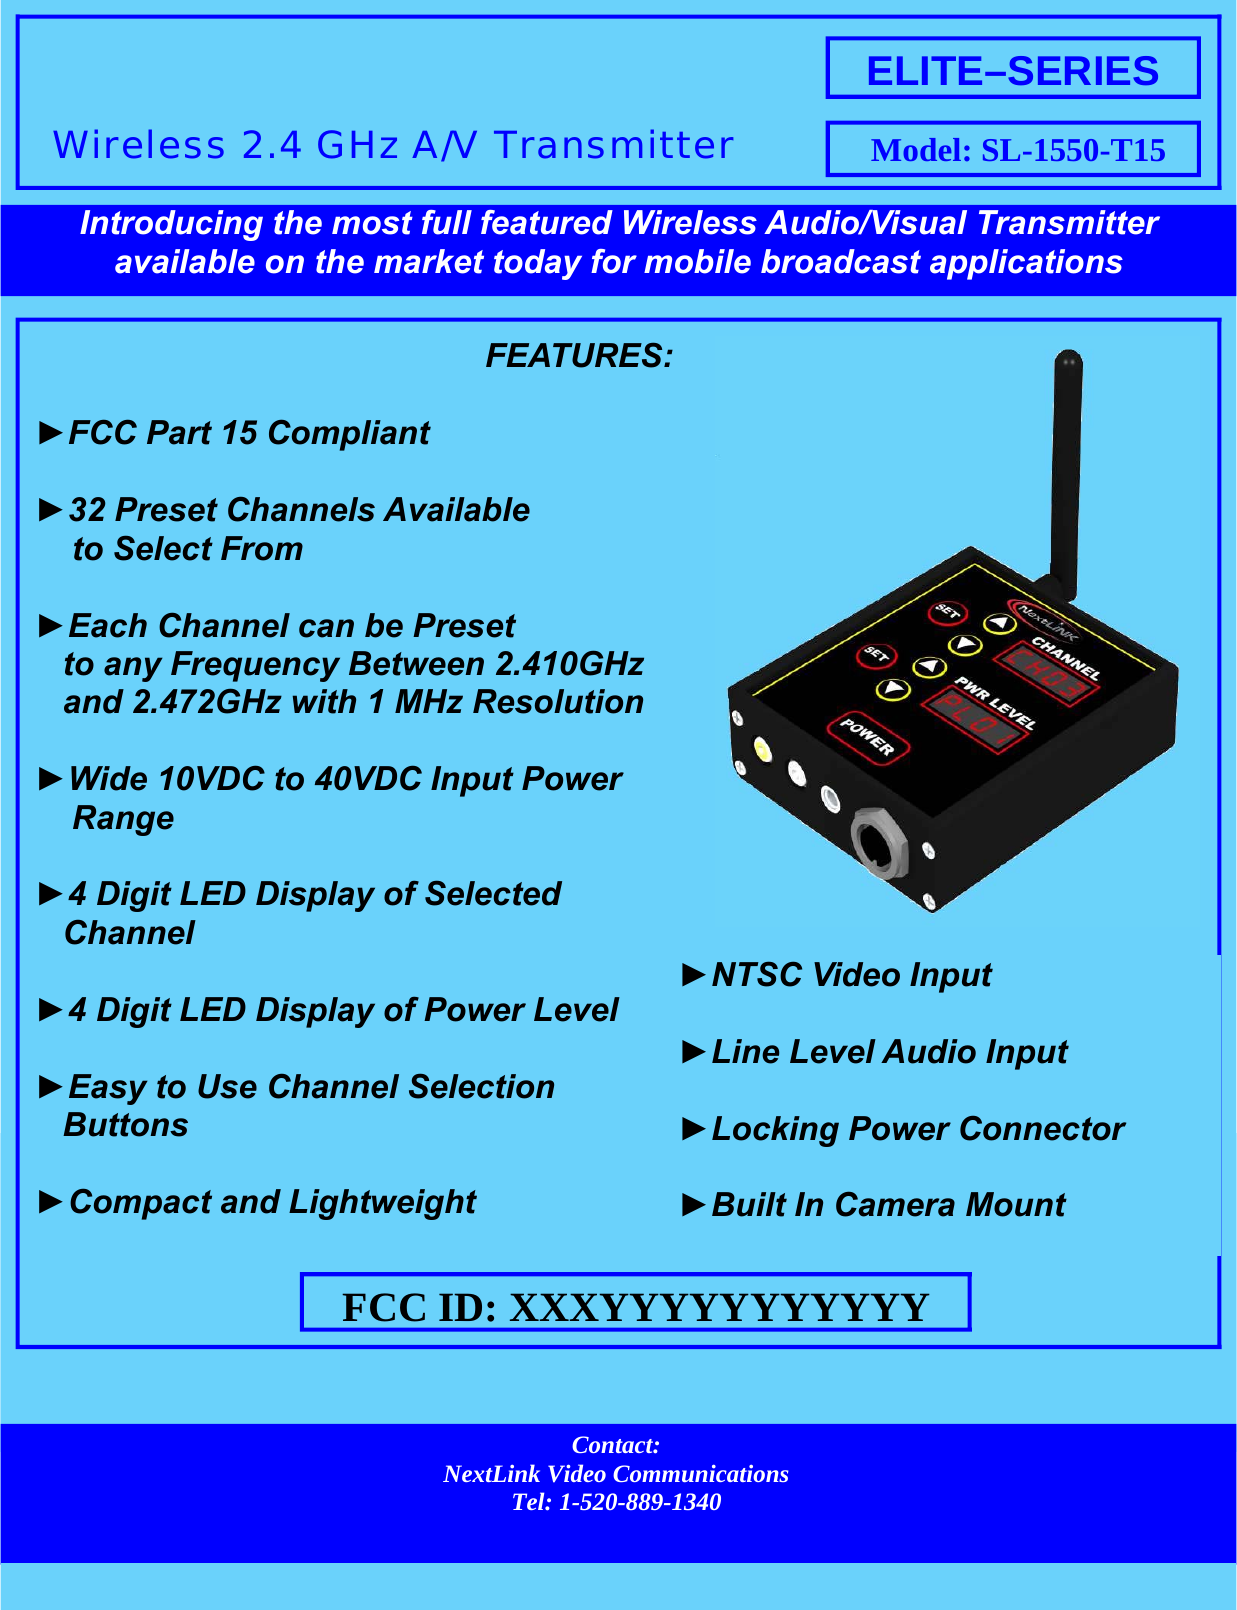 ►FCC Part 15 Compliant ► to Select From ► to any Frequency Between 2.410GHzand 2.472GHz with 1 MHz Resolution ► Range ►4 Digit LED Display of SelectedChannel ►4 Digit LED Display of Power Level ►Easy to Use Channel SelectionButtons ►Compact and Lightweight ELITE–SERIES Model: SL-1550-T15 Contact: NextLink Video Communications Tel: 1-520-889-1340 available on the market today for mobile broadcast applications ►►►Locking Power Connector ►Built In Camera Mount FCC ID: XXXYYYYYYYYYYY FEATURES: 32 Preset Channels Available Each Channel can be Preset Wide 10VDC to 40VDC Input Power  Introducing the most full featured Wireless Audio/Visual Transmitter  Wireless 2.4 GHz A/V Transmitter NTSC Video Input Line Level Audio Input 